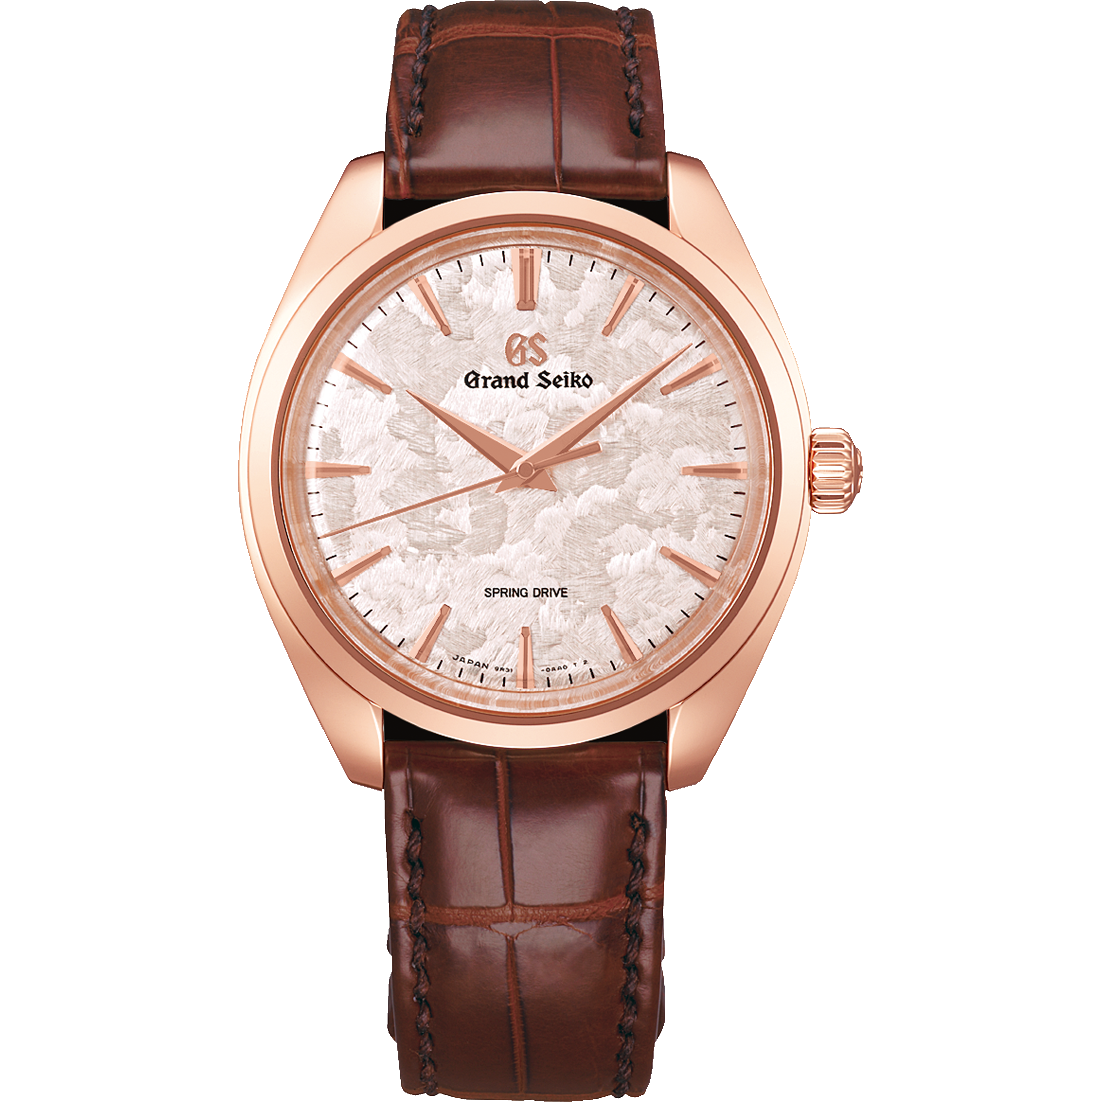 Grand Seiko 'Hana-Ikada' Spring Drive Limited Edition | Seiko Boutique |  The Official UK Online Store